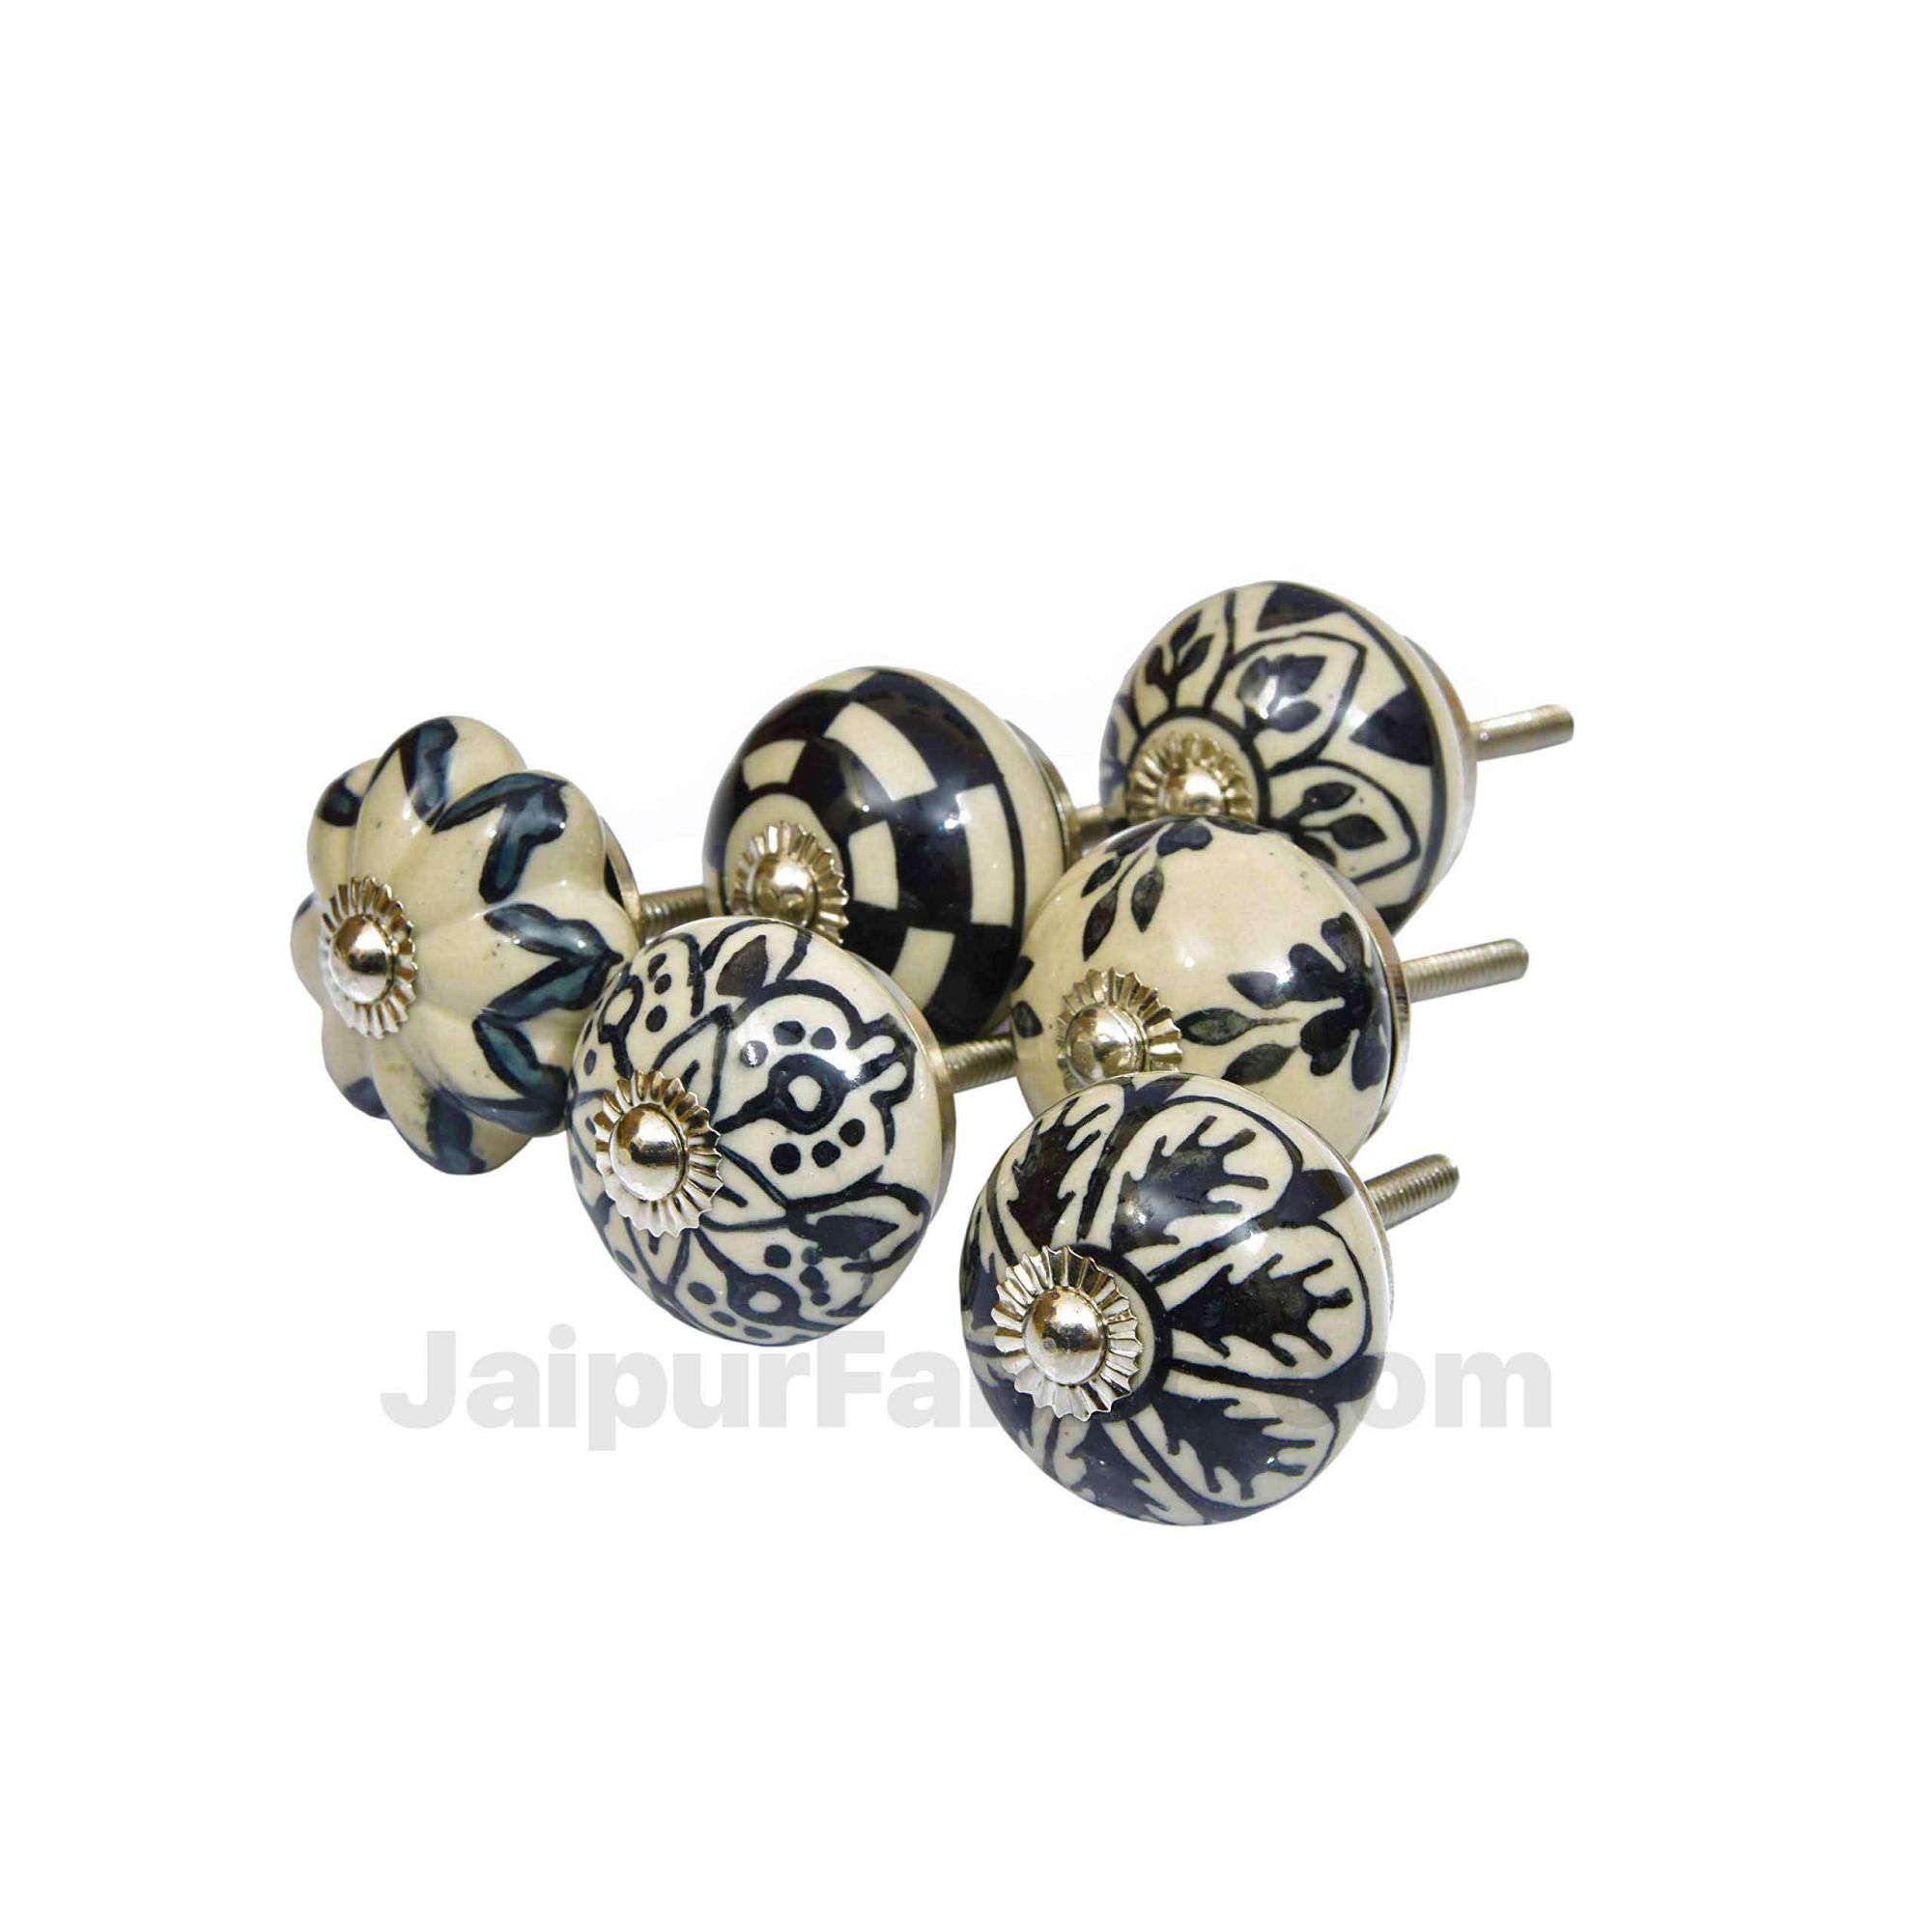 Black & White Set of 6 Pcs Fabricated Knobs for Doors and Cabinets with Brass Blue Pottery